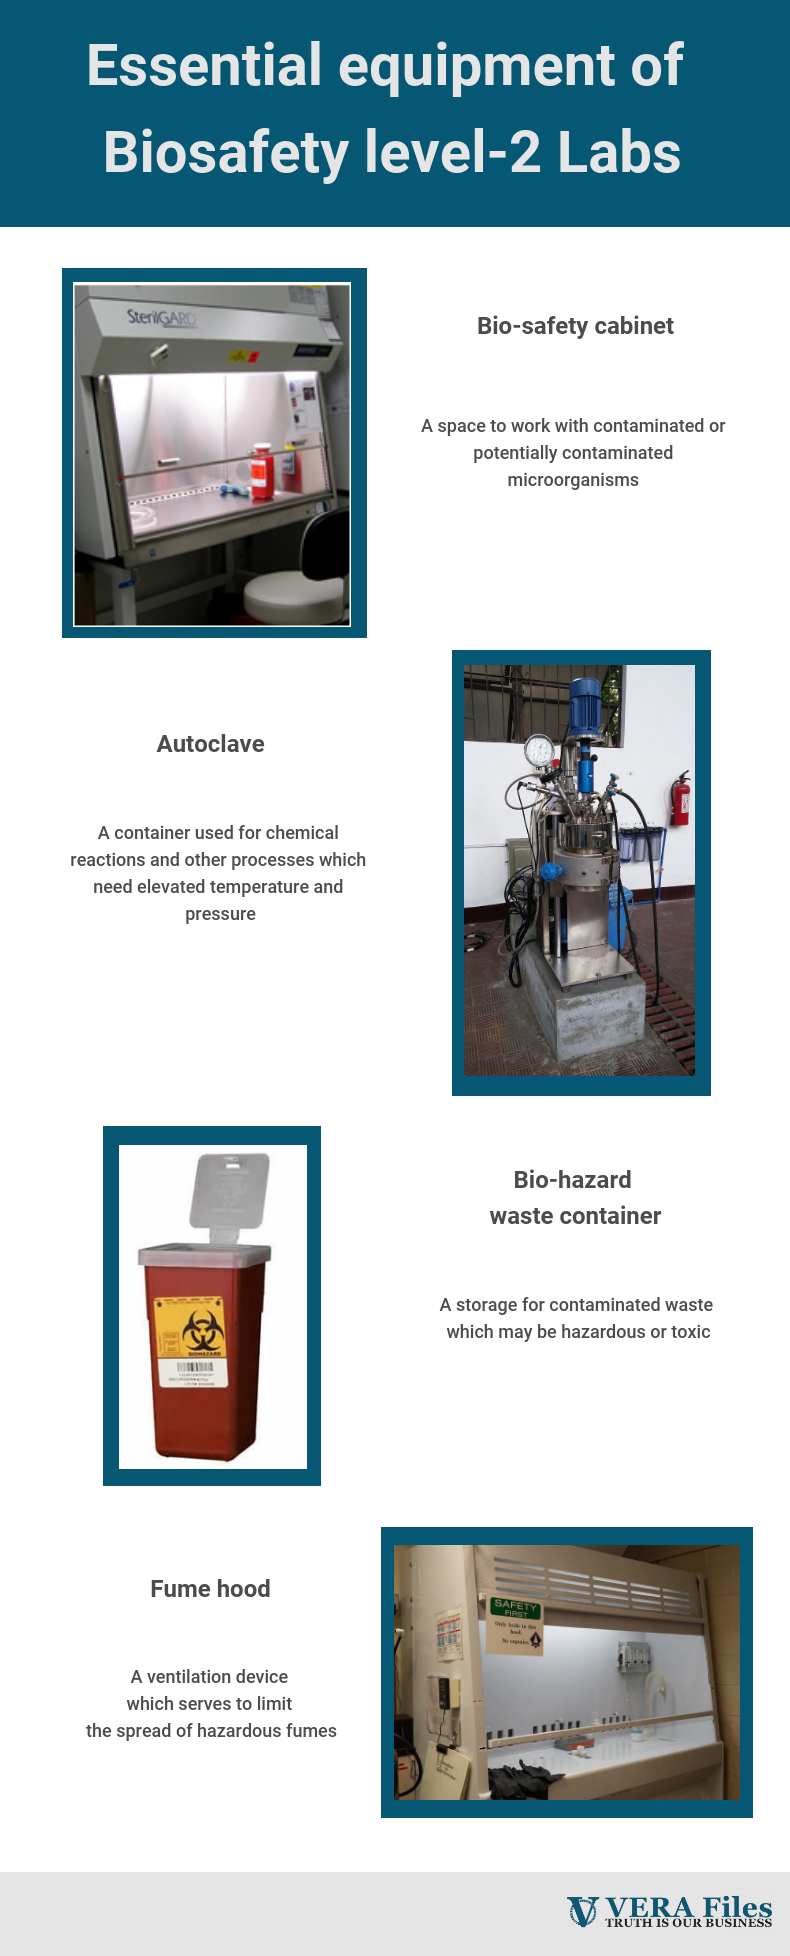 Essential equipment of Biosafety level-2 labs